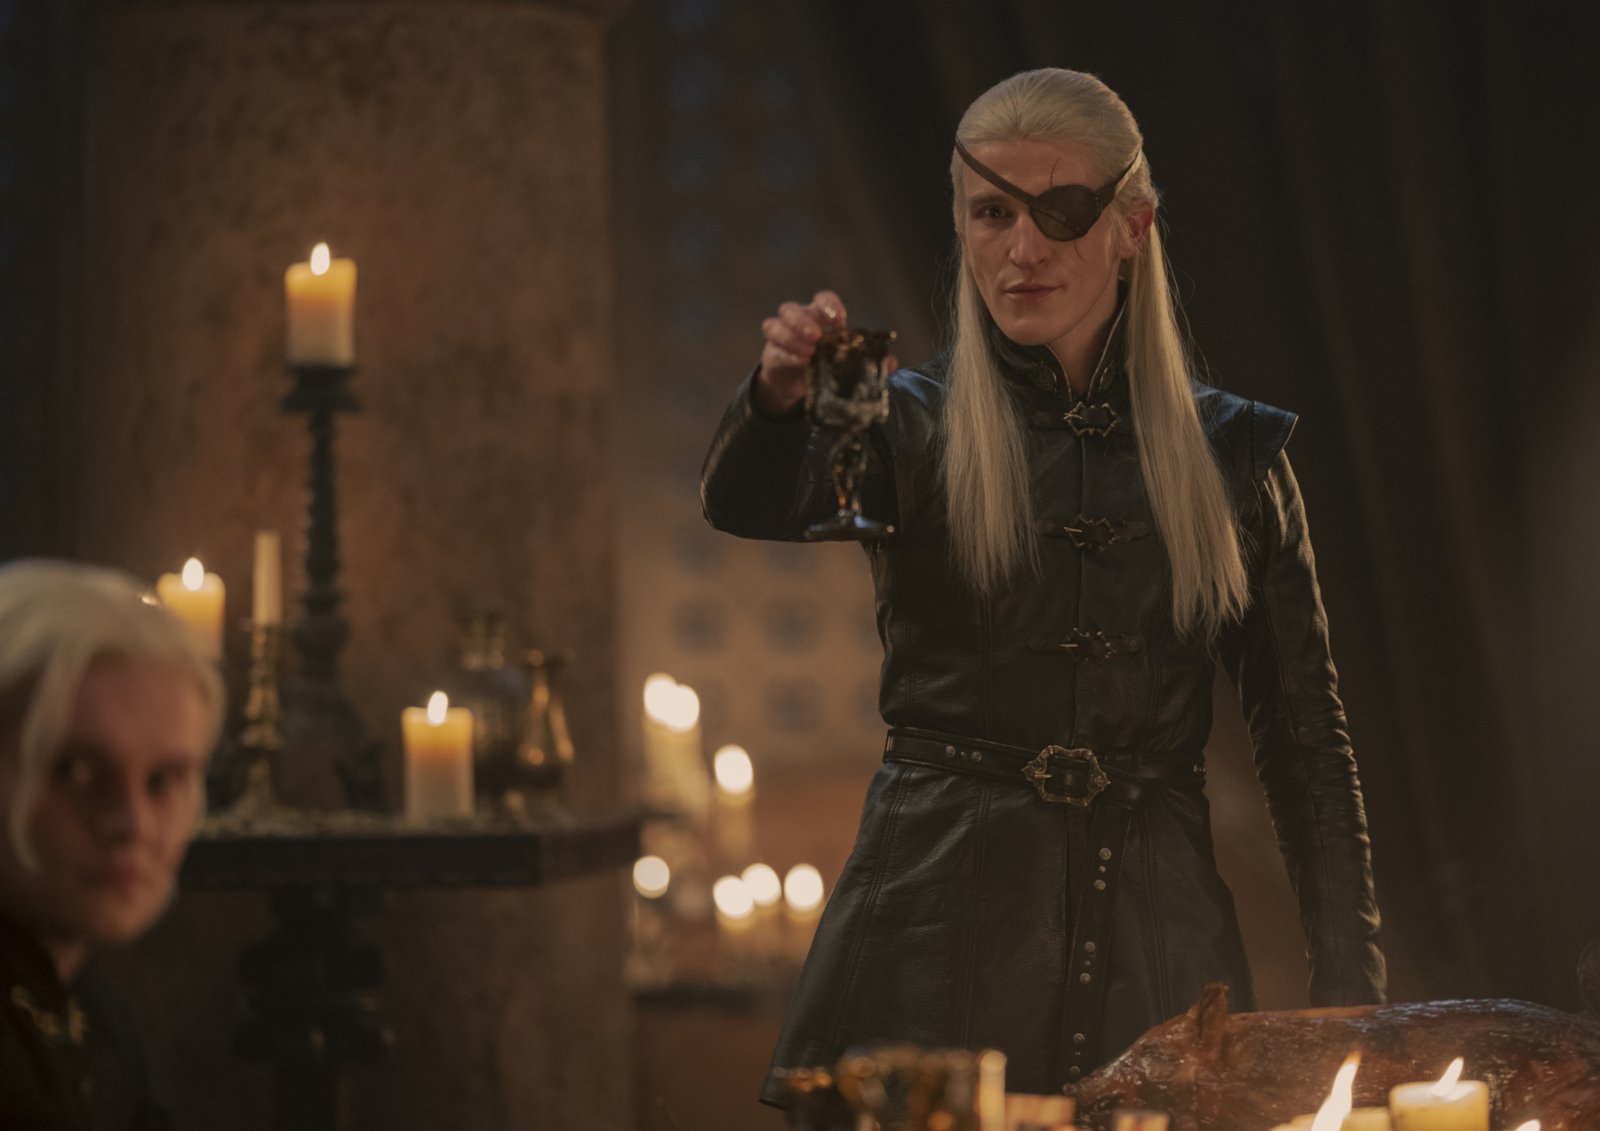 Actor Ewan Mitchell who plays an older Aemond Targaryen in 'House of the Dragon.' He's wearing an eye patch, has long, blonde hair, and his holding up a wine glass.